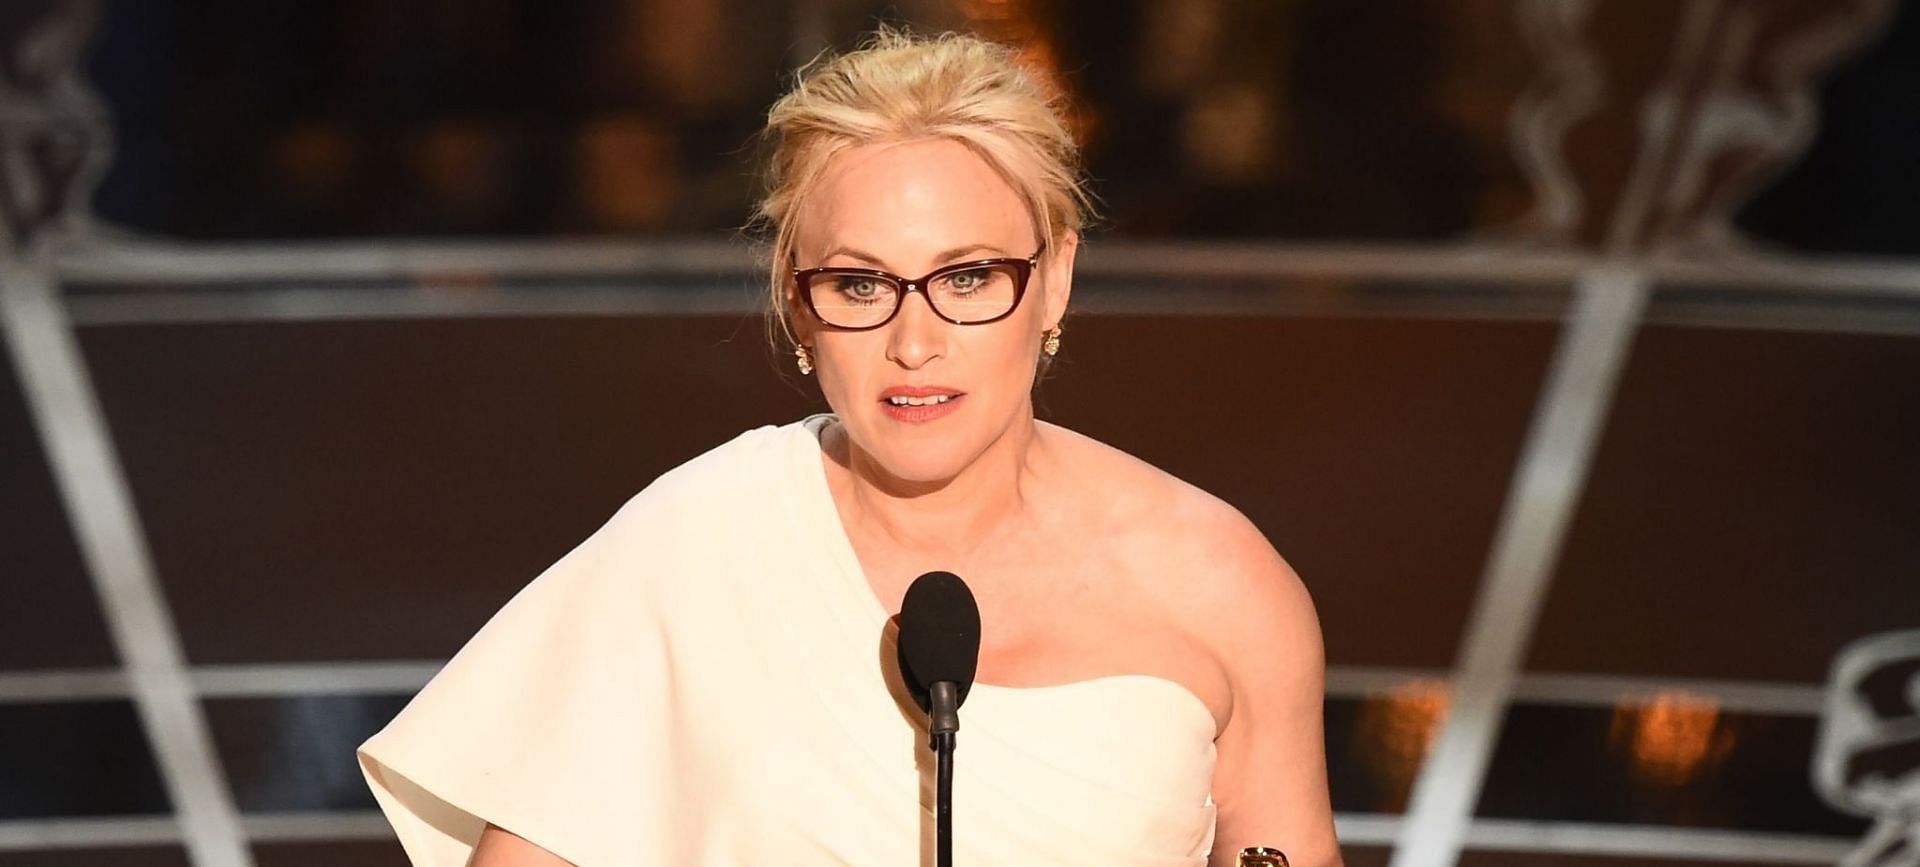 Patricia Arquette&rsquo;s NATO tweet left the internet divided (Image via Robyn Beck/Getty Images)